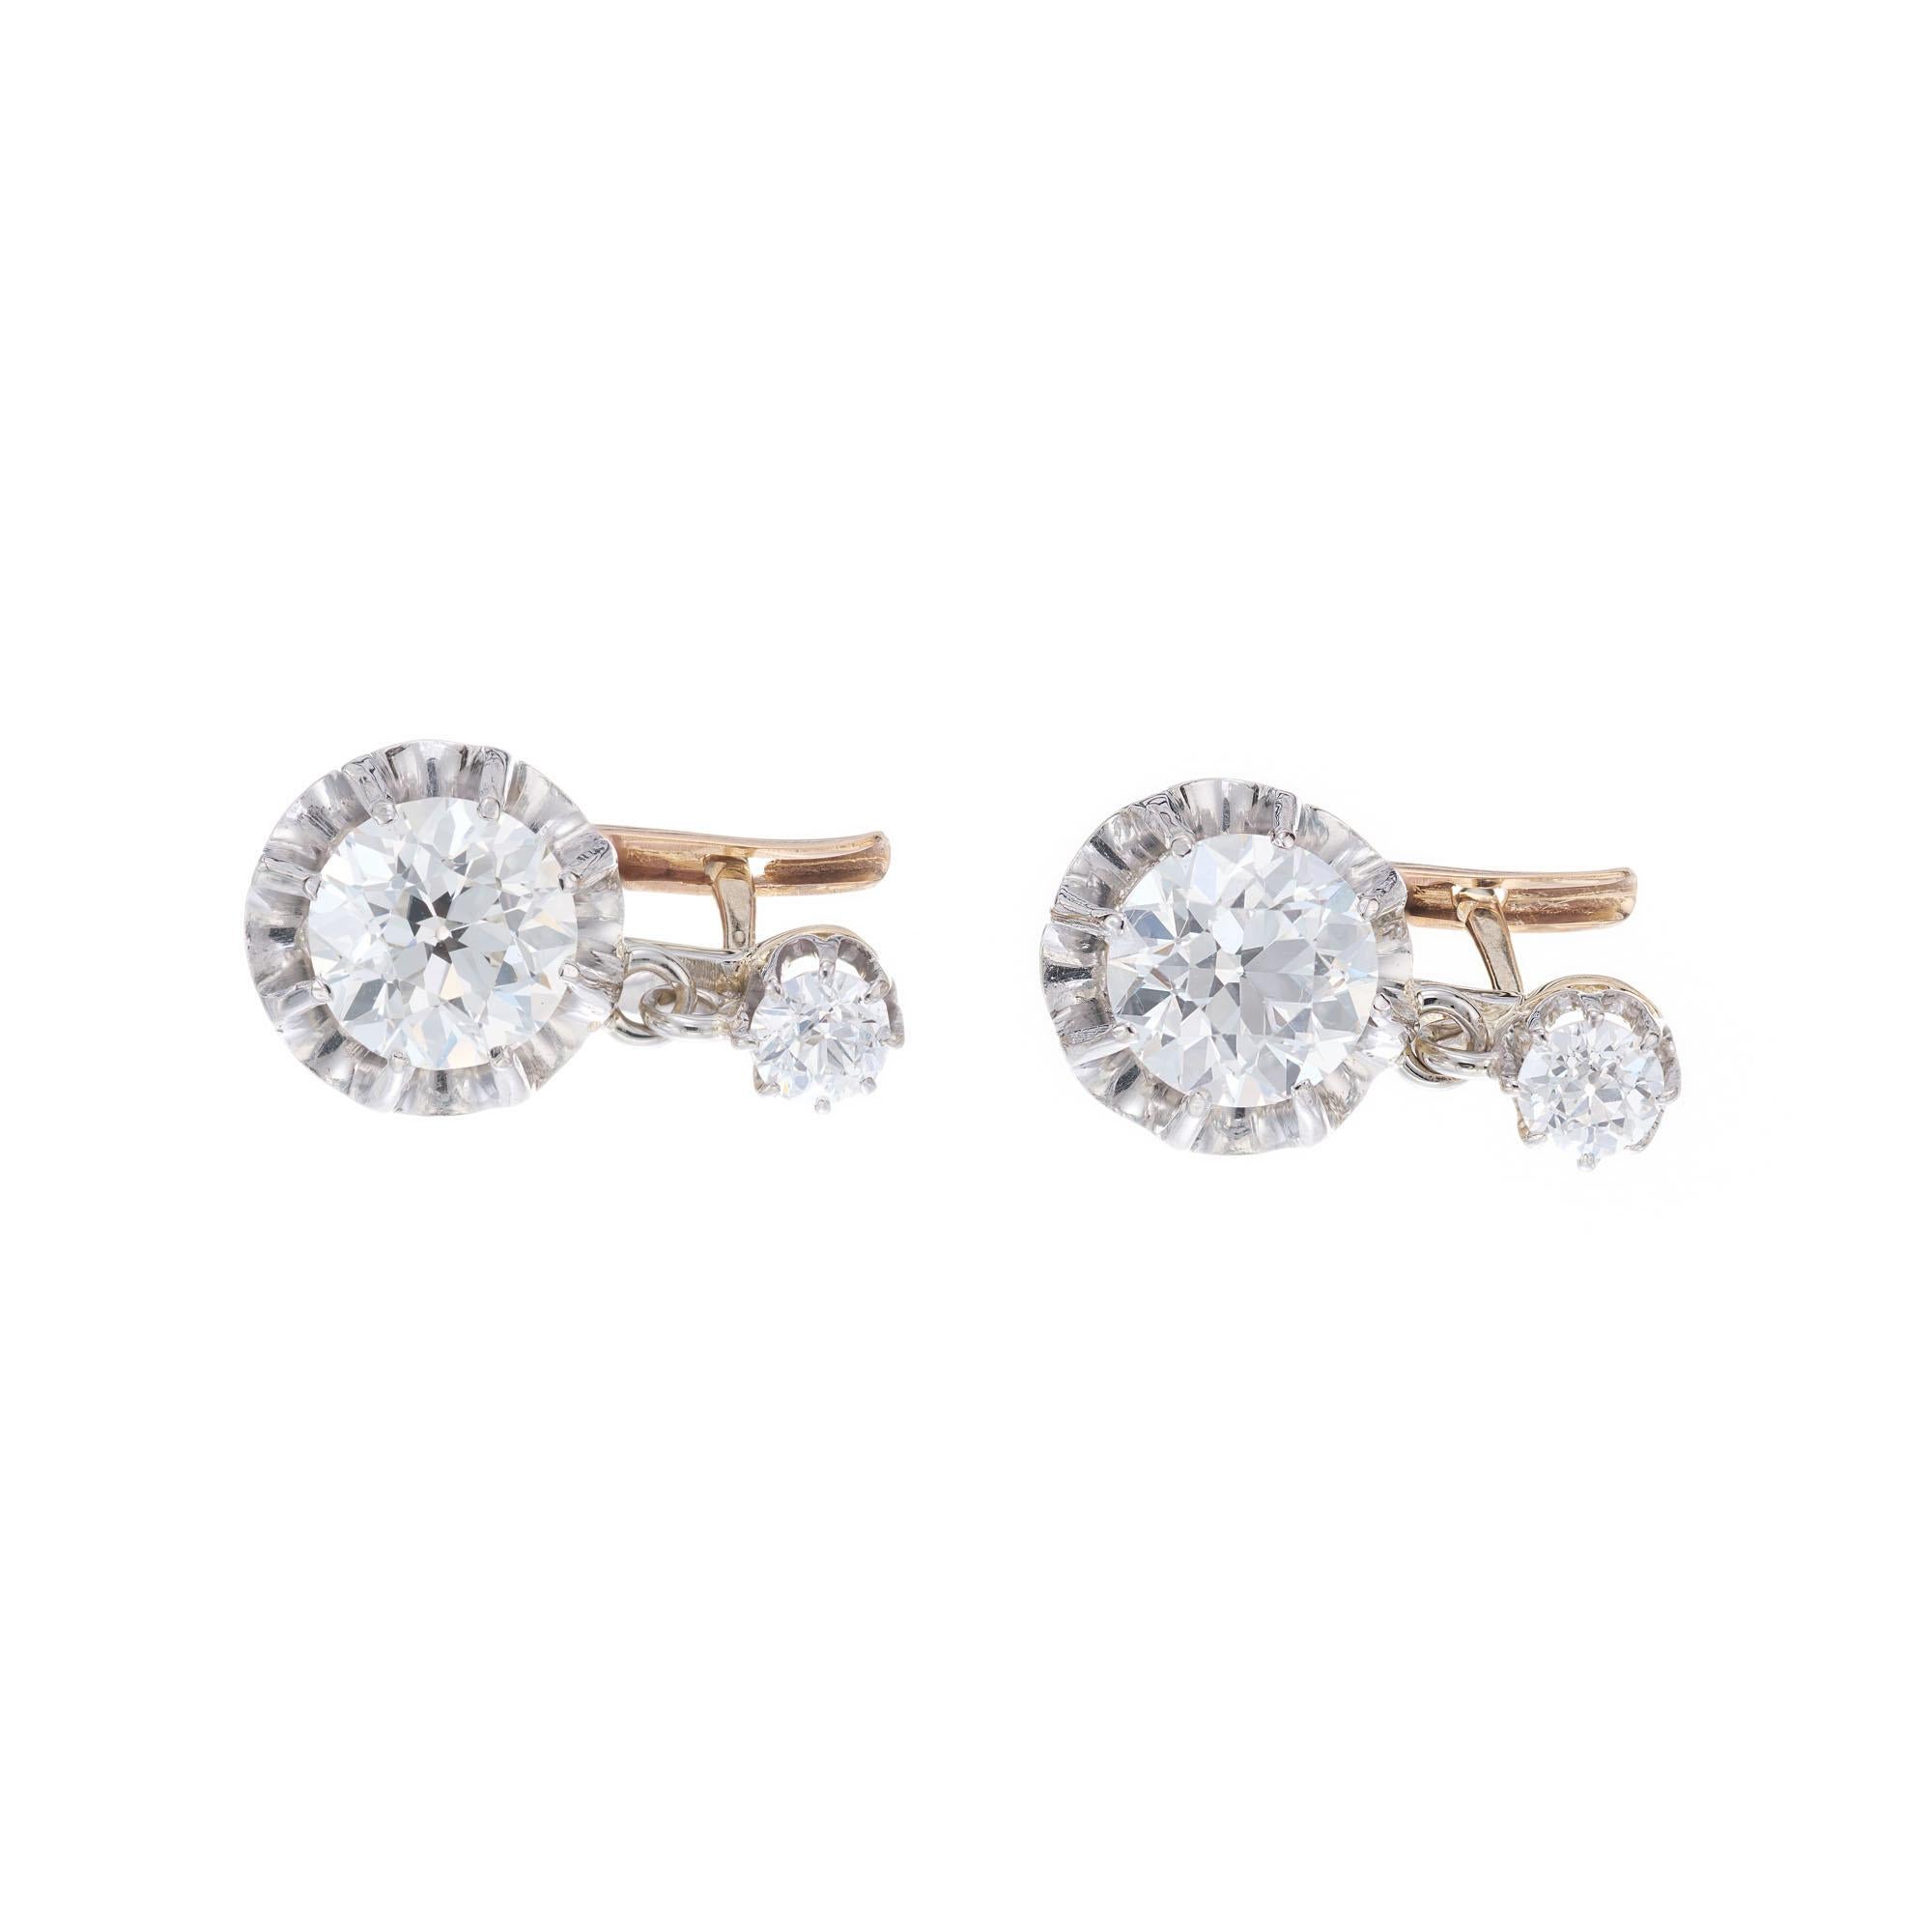 Early 1900's Old European brilliant cut diamond dangle earrings. 2 GIA certified diamonds set in Platinum, accented with 2 old European top diamonds. 18k yellow gold lever backs. 

1 old European brilliant cut diamond, approx. total weight 1.32cts,